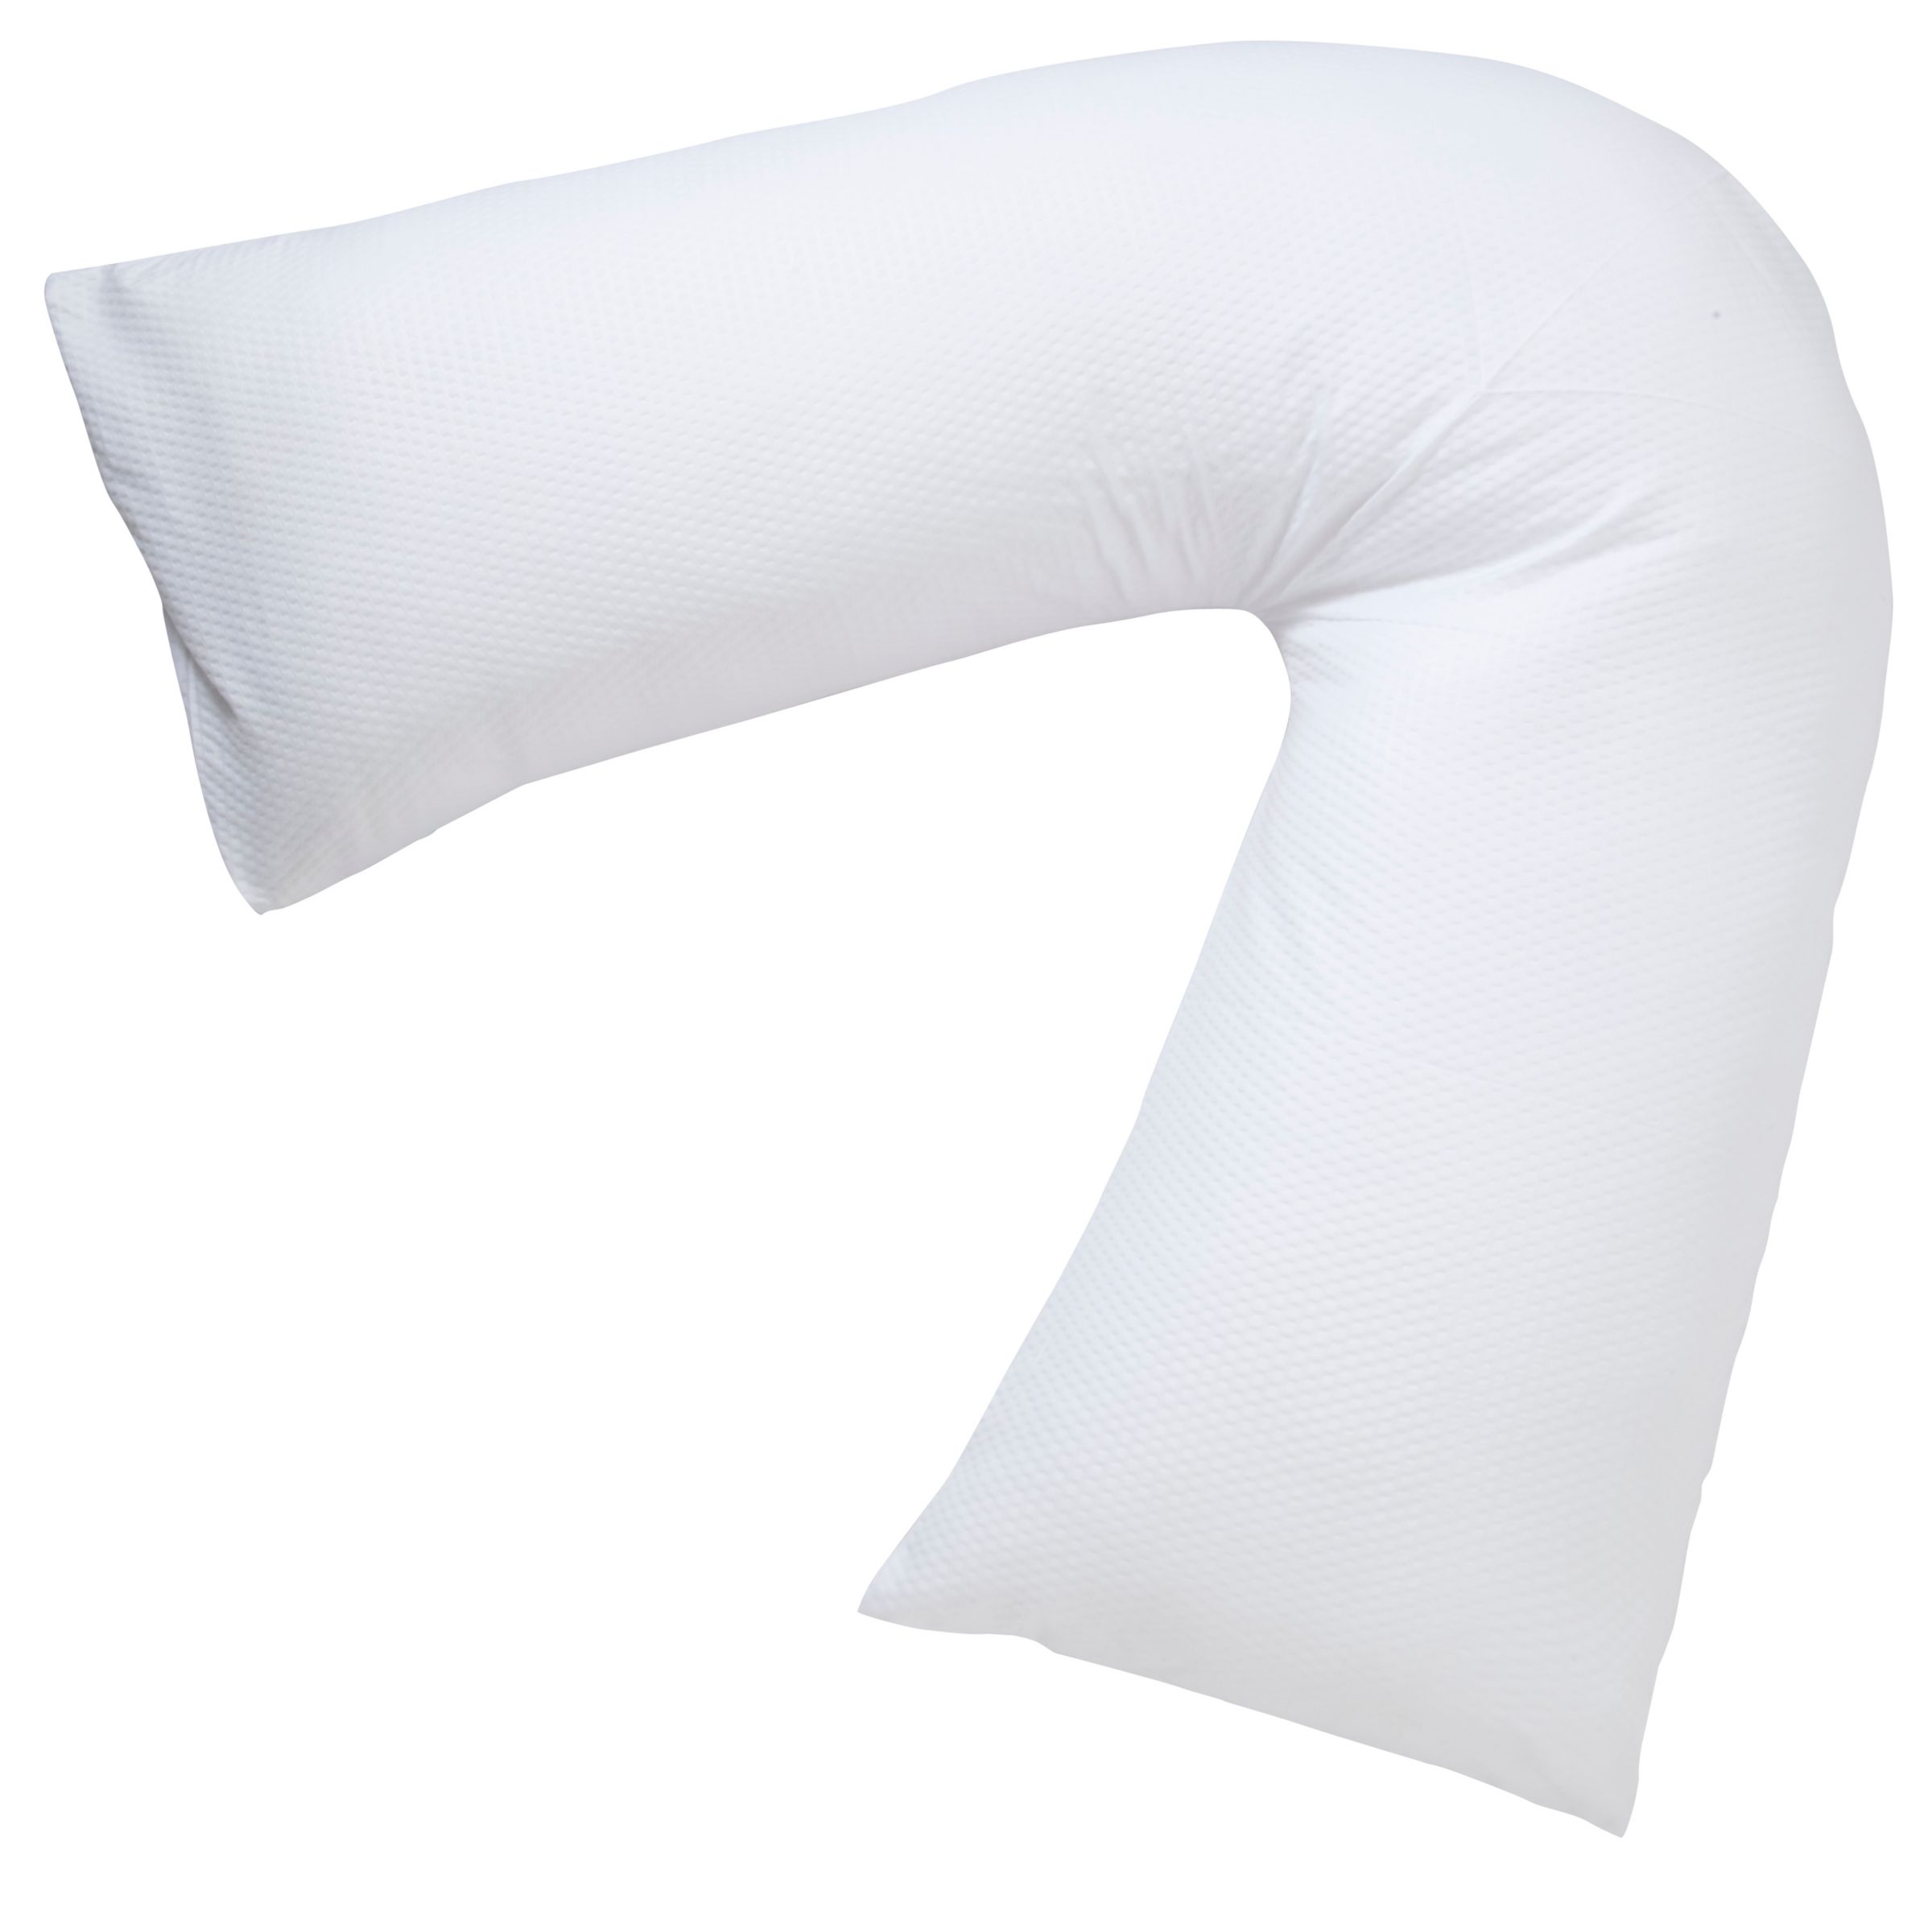 Image of John Lewis and Partners VShaped Maternity and Nursing Pillow